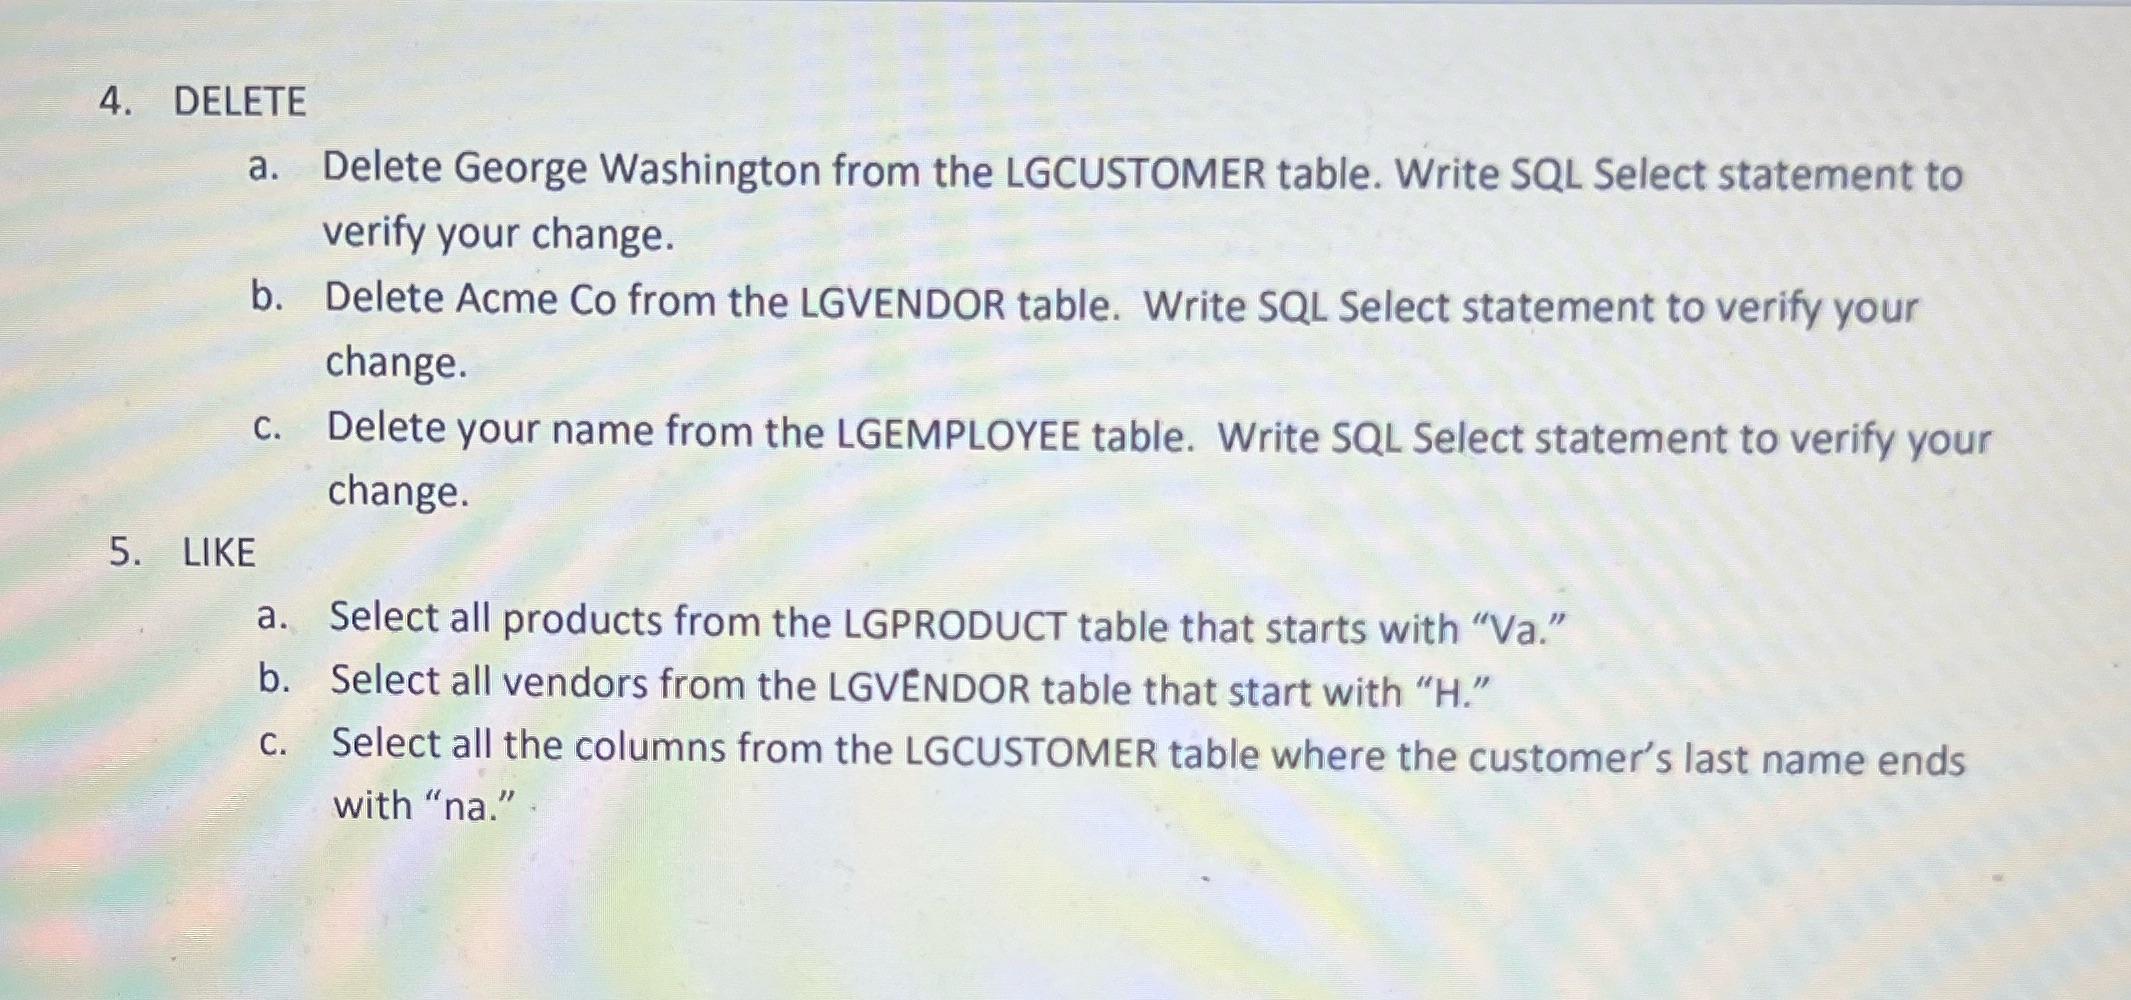 4. DELETE a. Delete George Washington from the LGCUSTOMER table. Write SQL Select statement to verify your